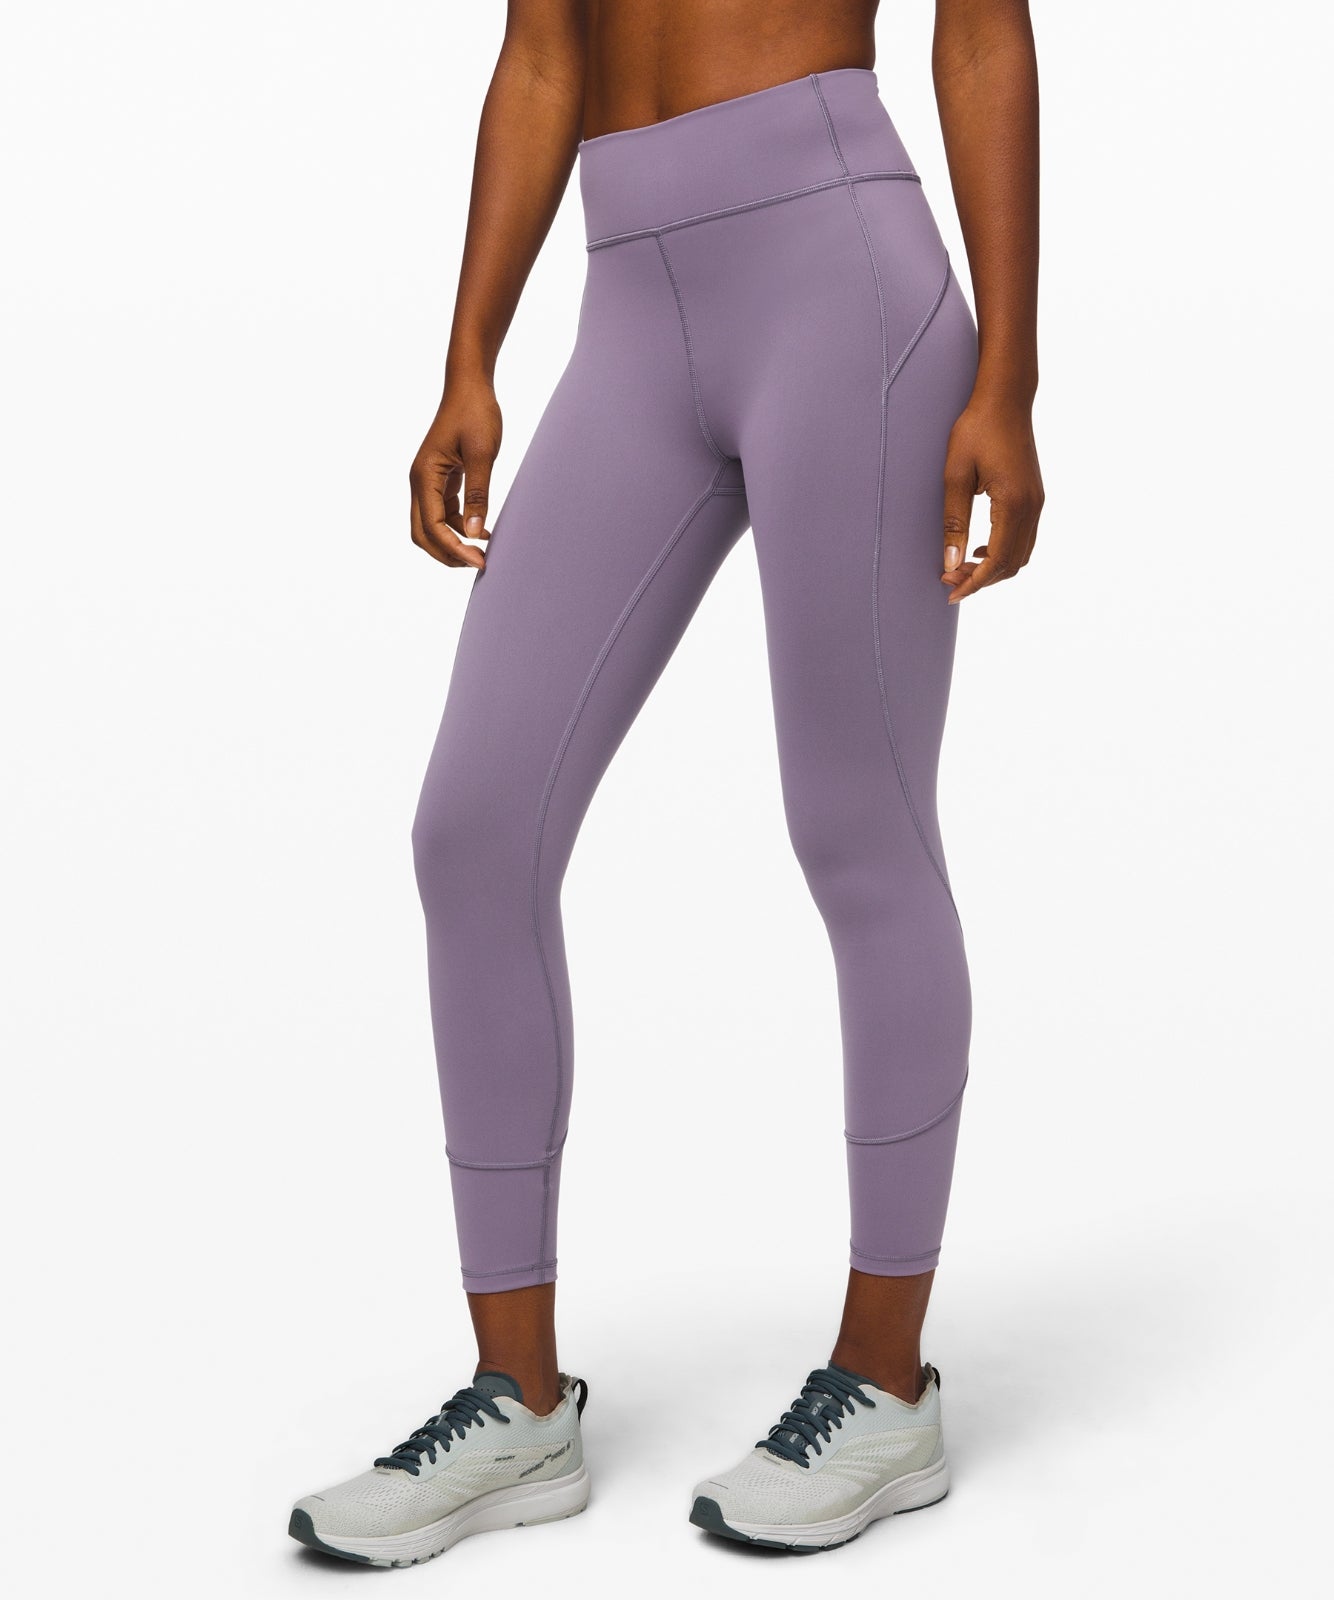 lululemon Review: In Movement Tights in Everlux - Schimiggy Reviews